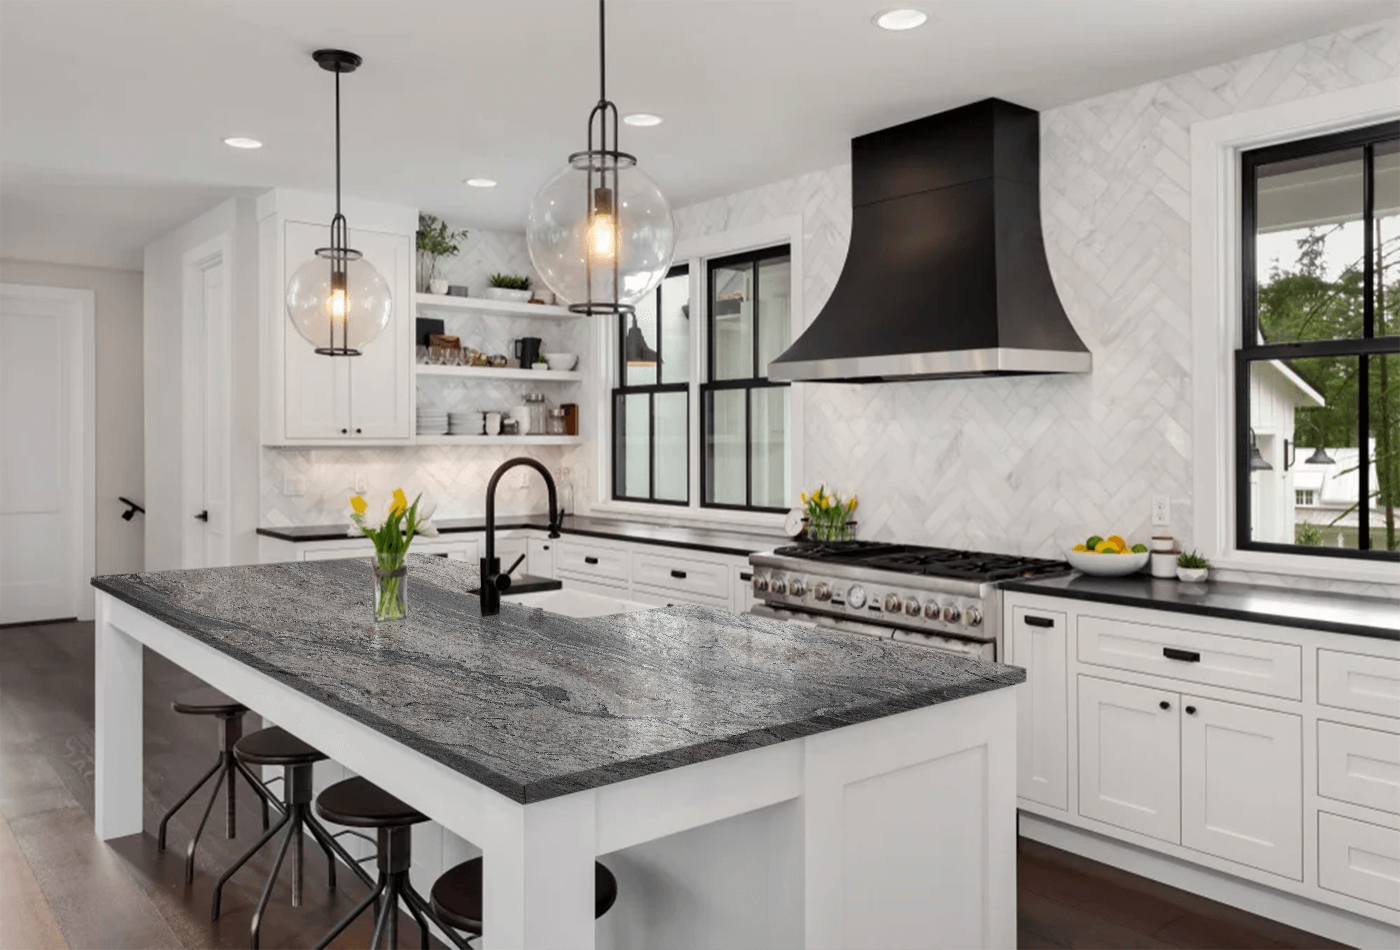 Usage of Bianco Granite leftovers for your kitchen